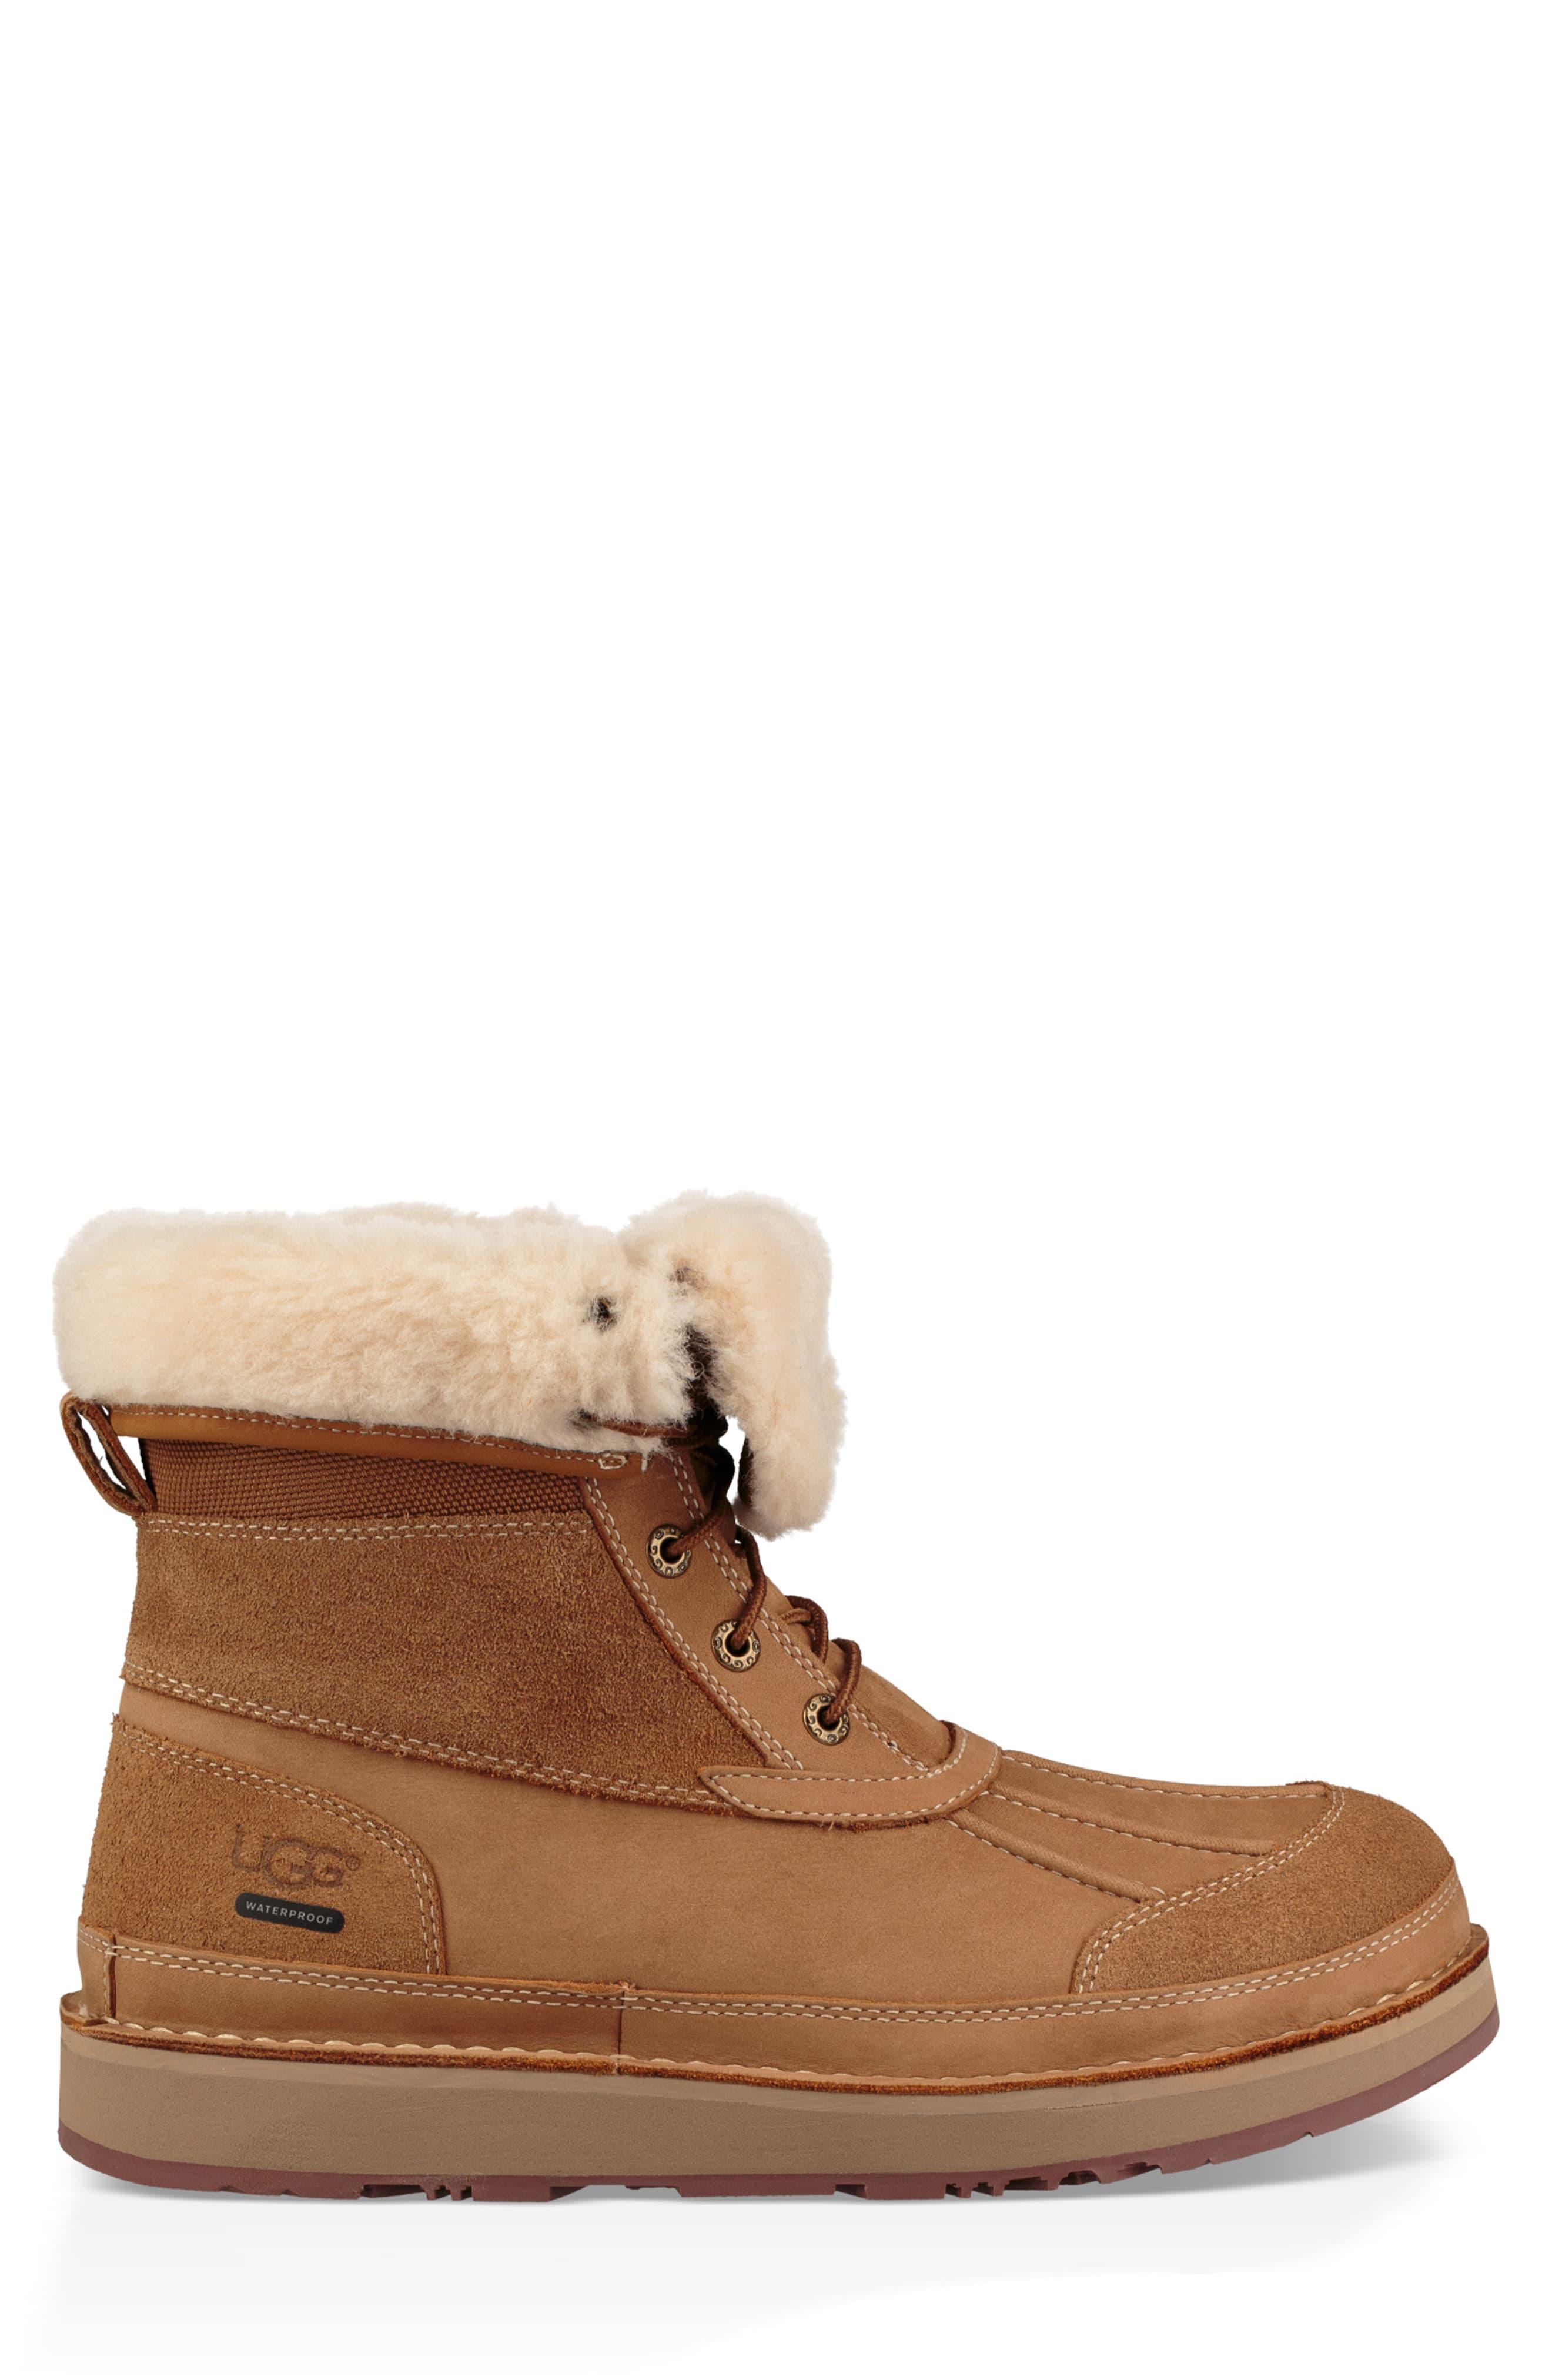 ugg avalanche boot